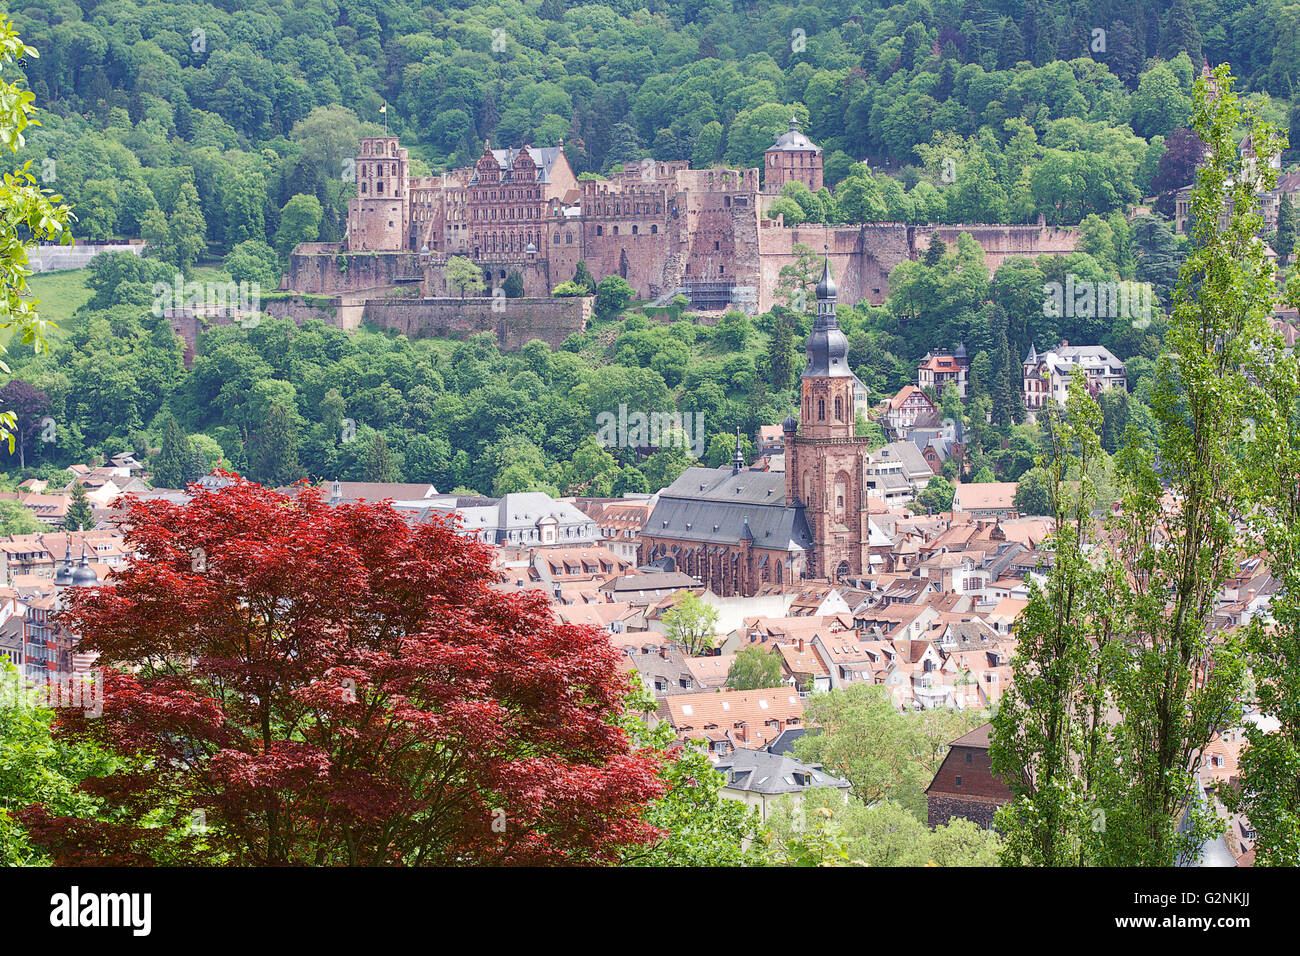 Heidelberg castle and town from the opposite bank of the river. Stock Photo